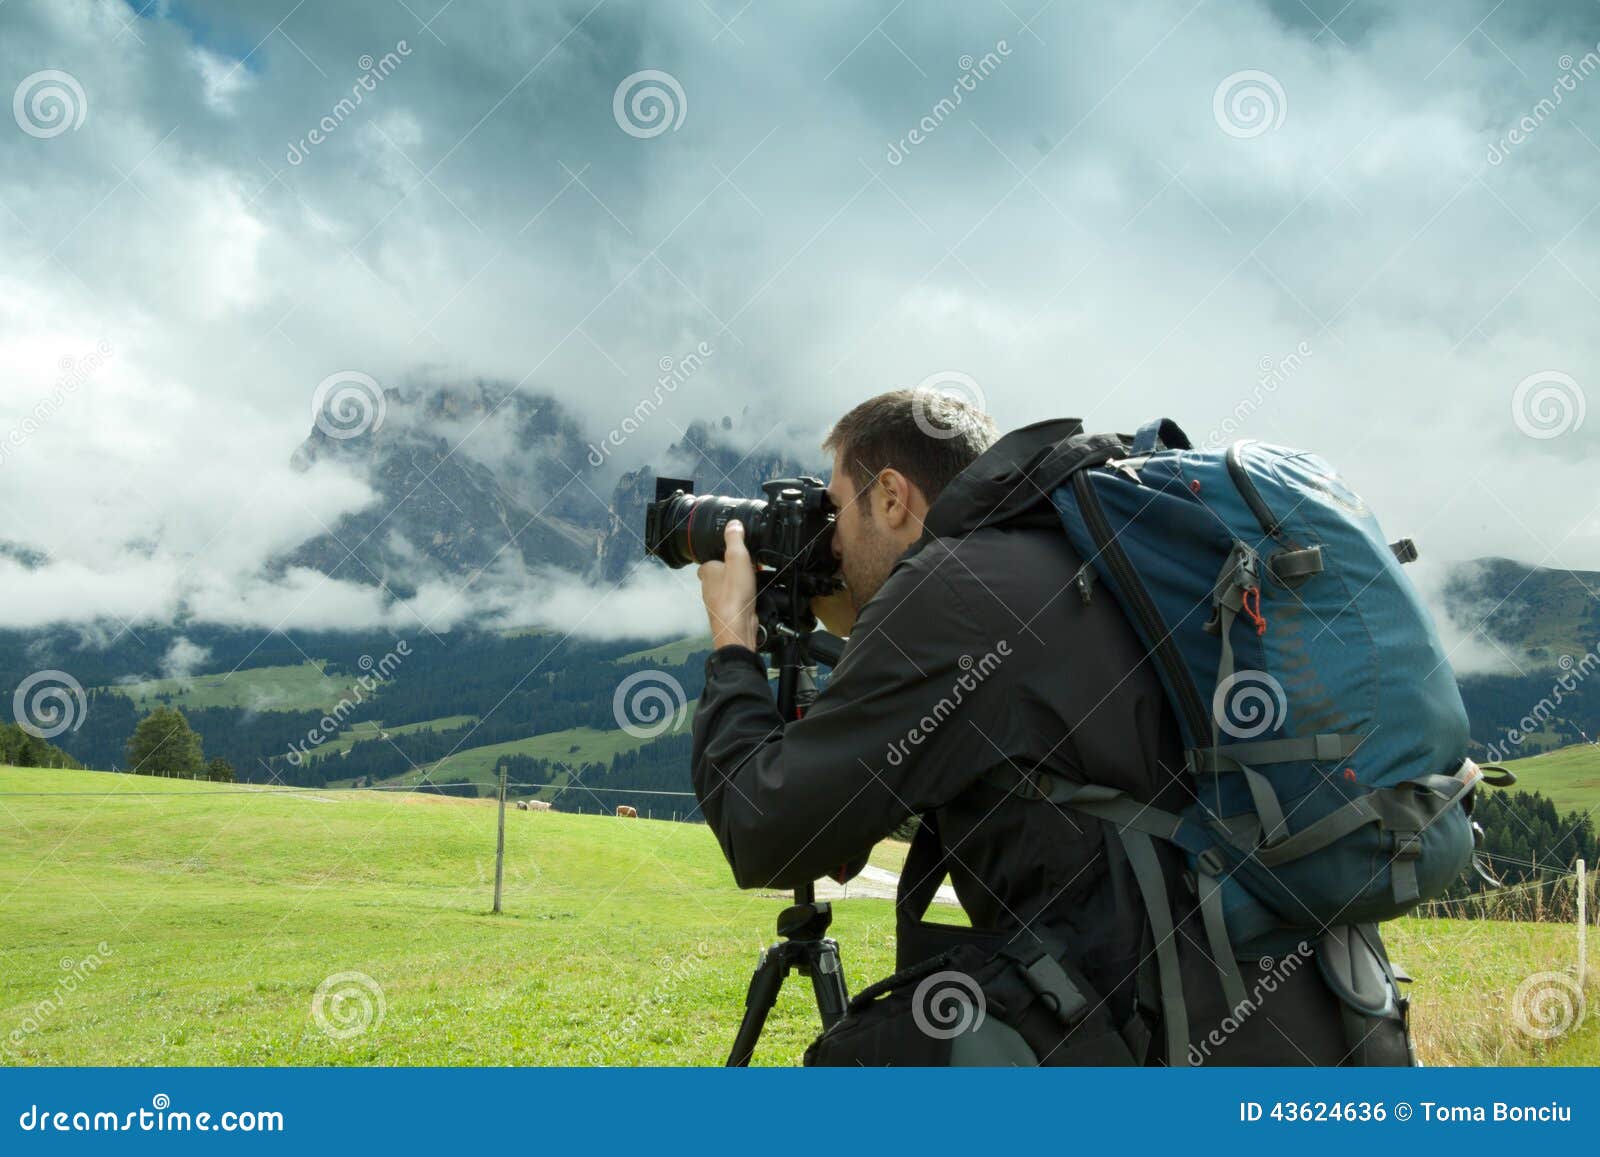 Stock Photo: Nature and landscape photographer in Dolomite